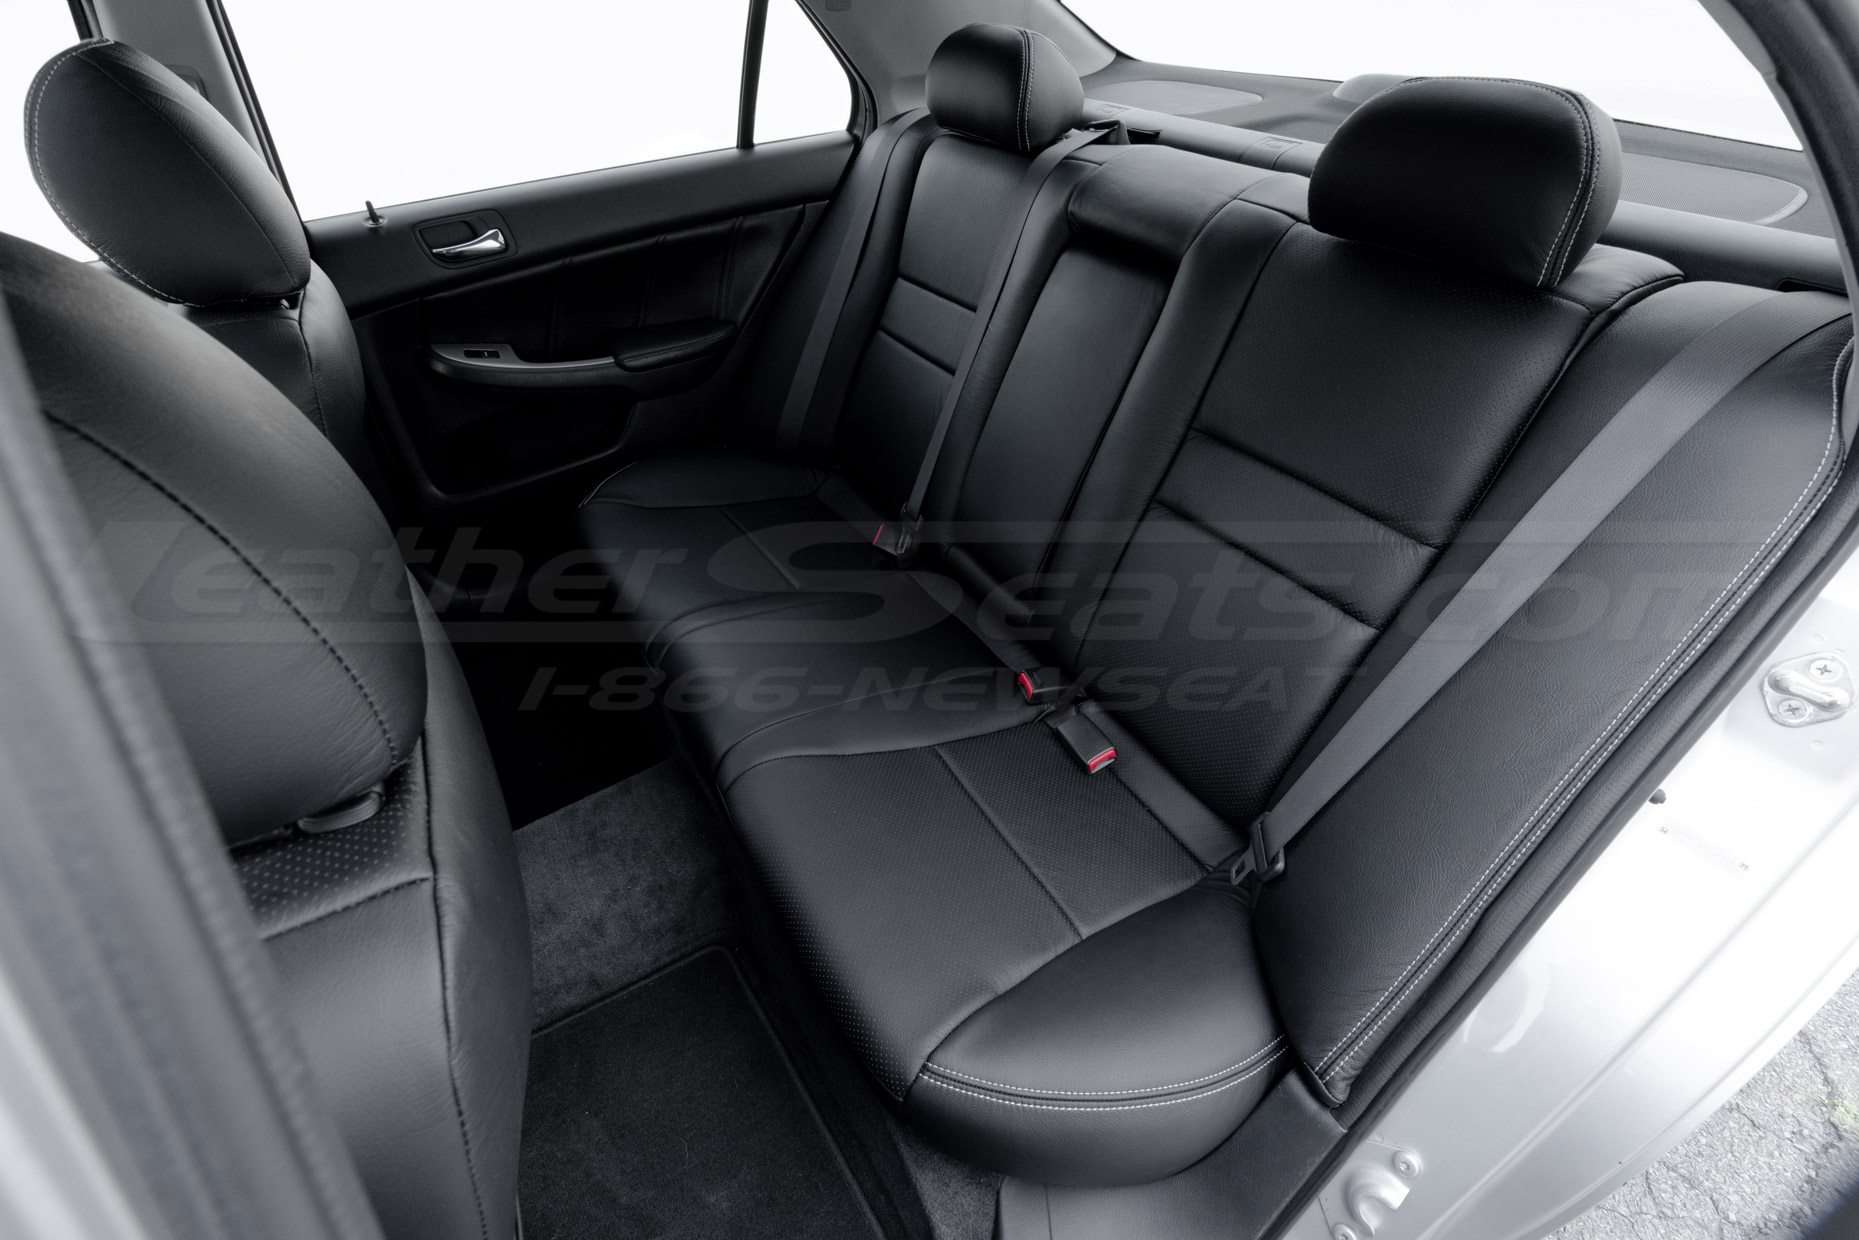 Honda Accord with installed leather seats - Rear seats from driver side